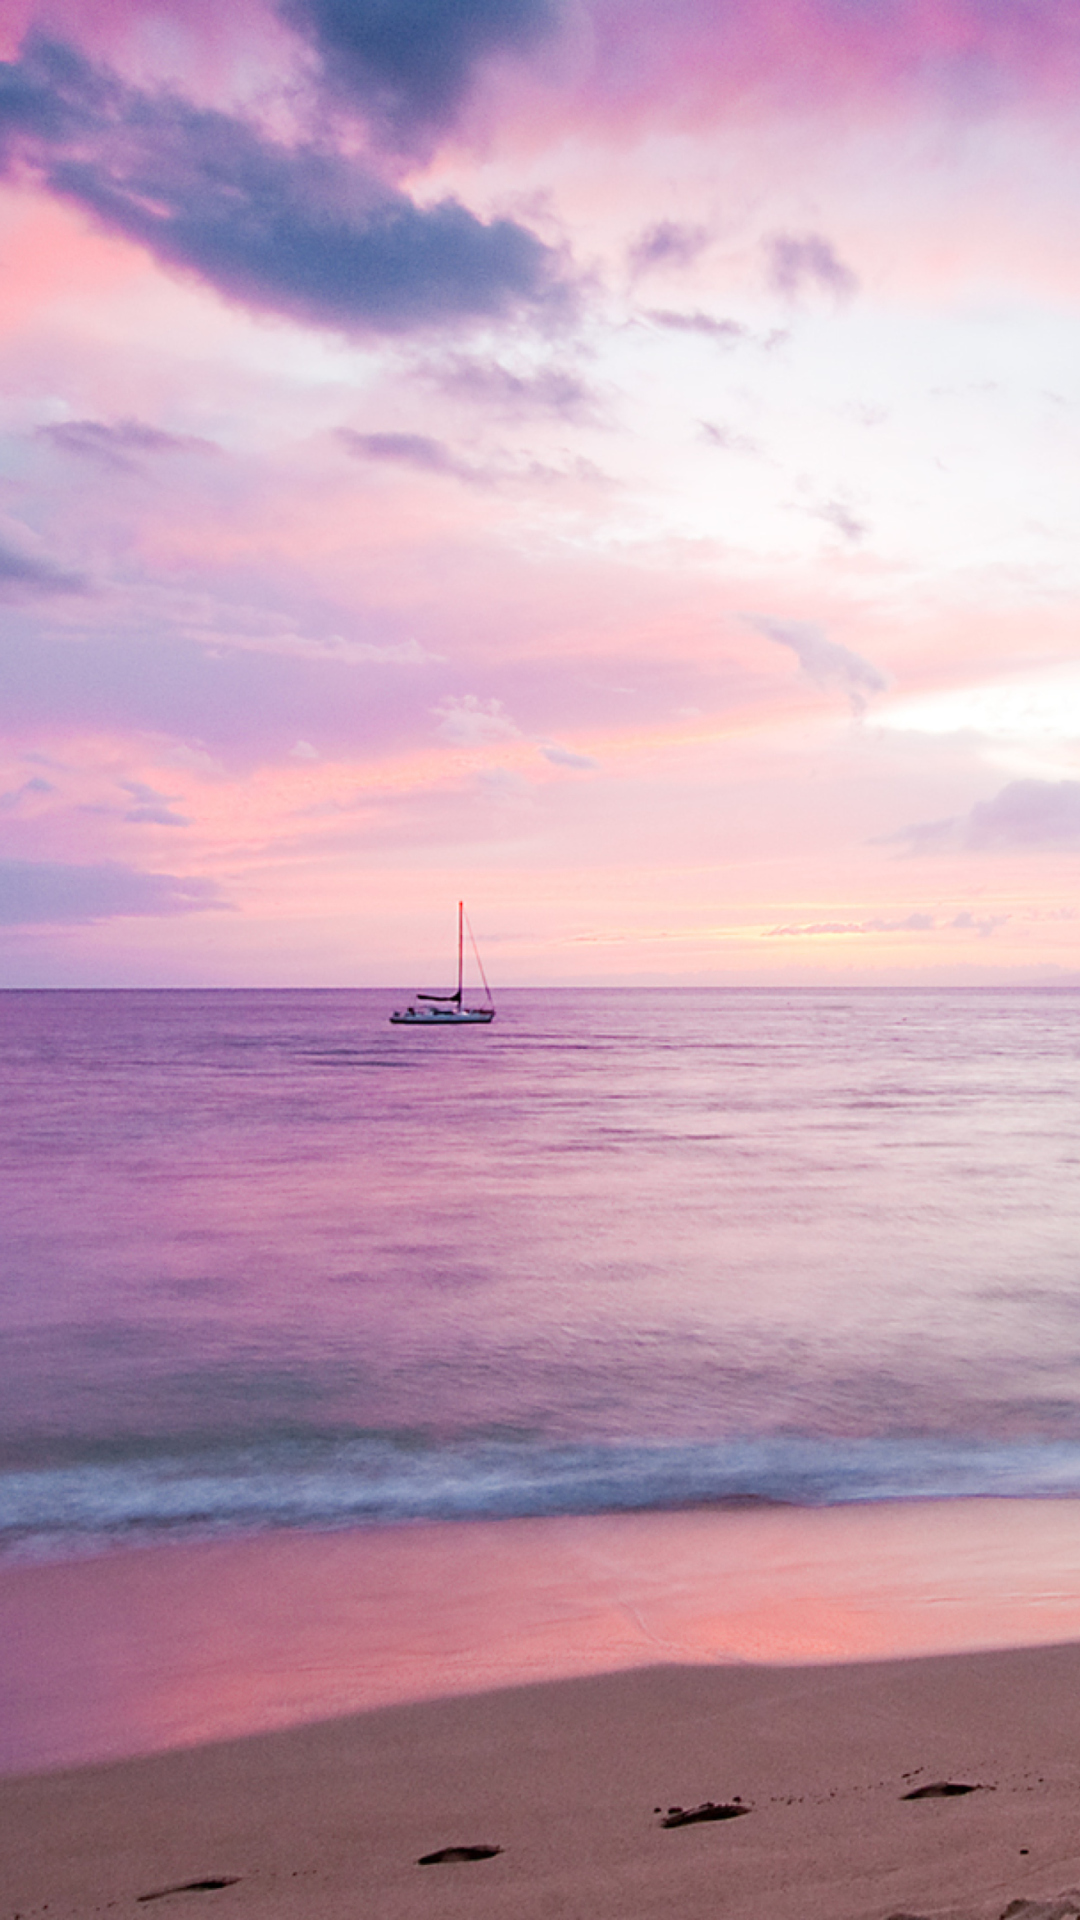 Pink Evening And Lonely Boat At Horizon screenshot #1 1080x1920